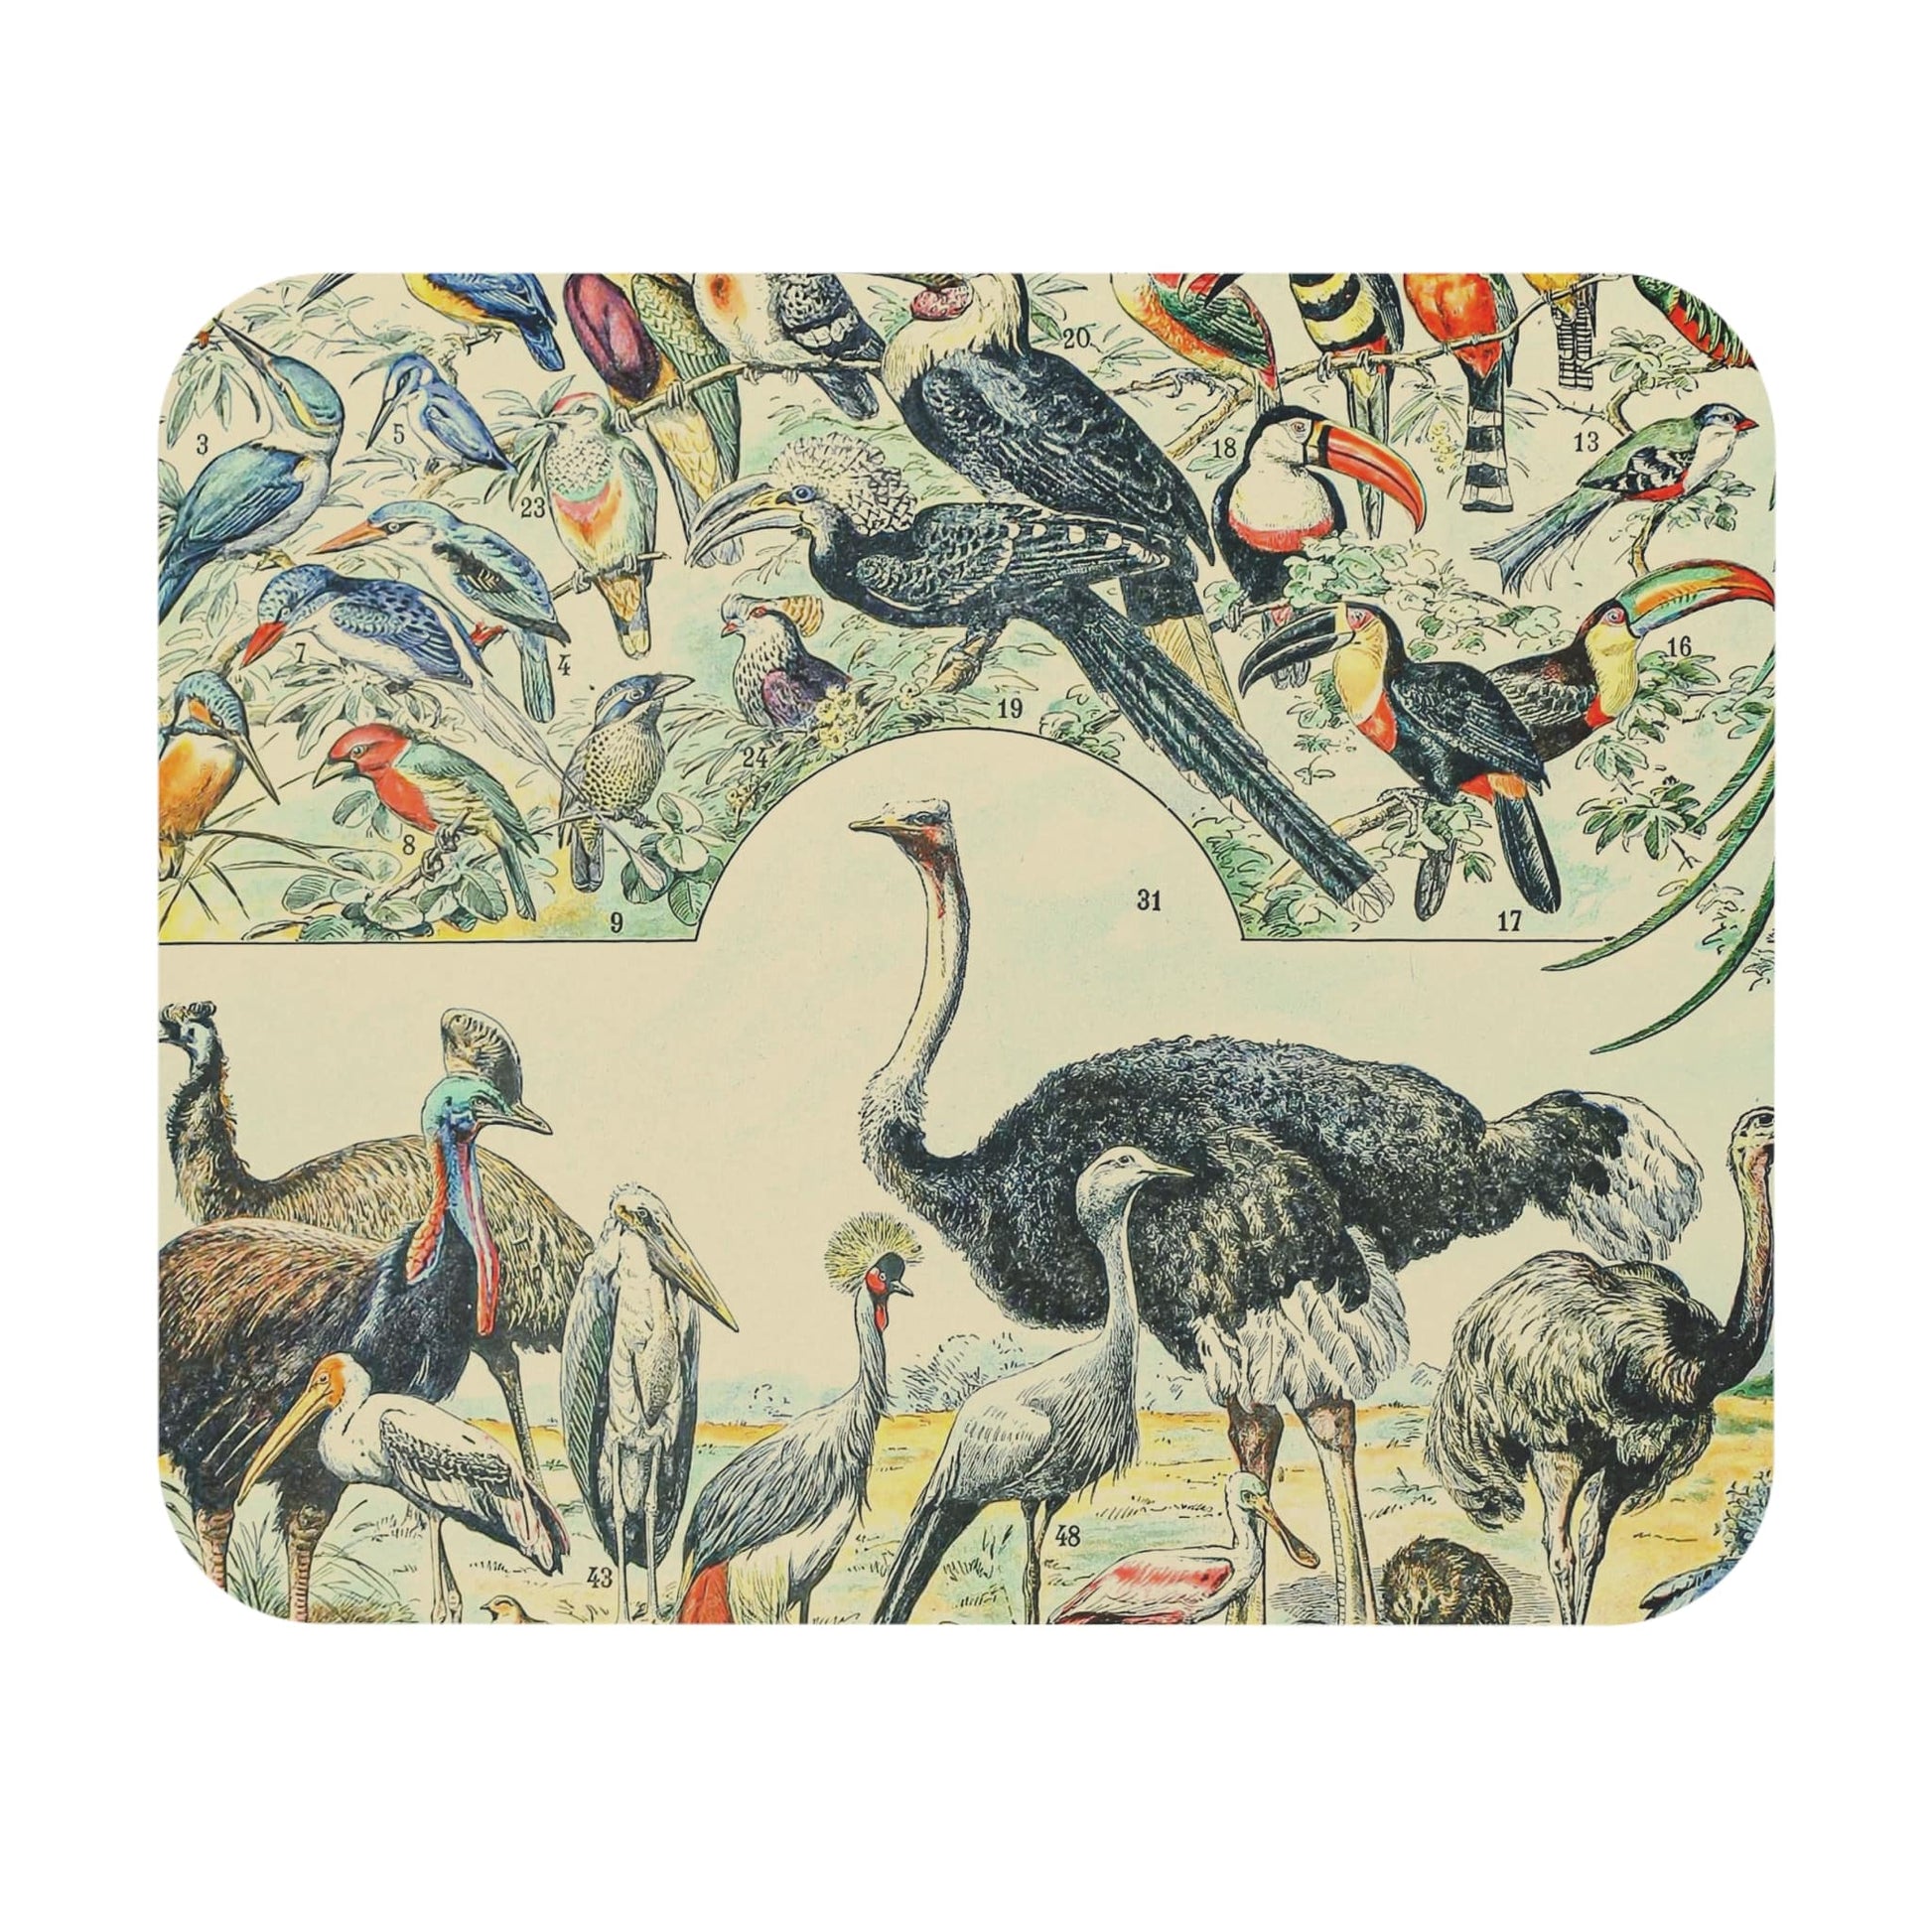 Collection of Birds Mouse Pad featuring an exotic bird chart design, complementing desk and office decor.